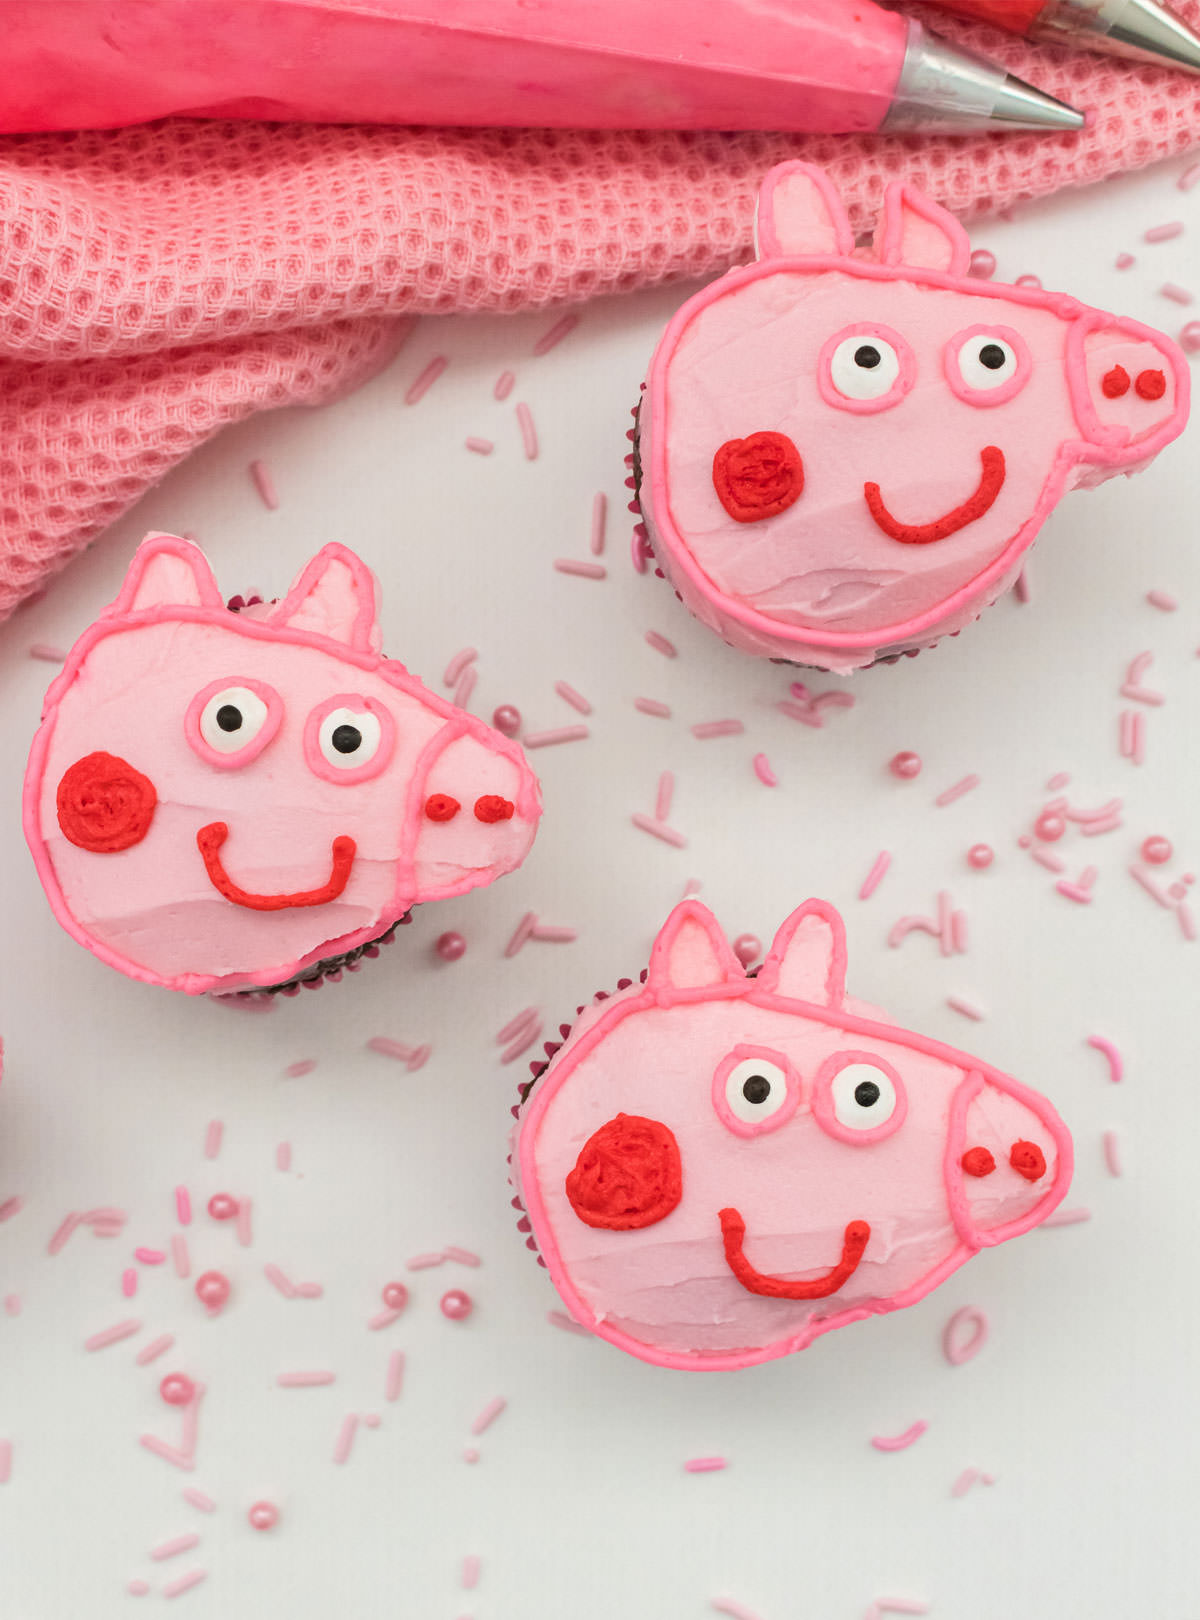 Closeup on three Peppa Pig Cupcakes sitting on a white surface, surrounded by pink sprinkles, in front of a pink table linen and pink frosting.